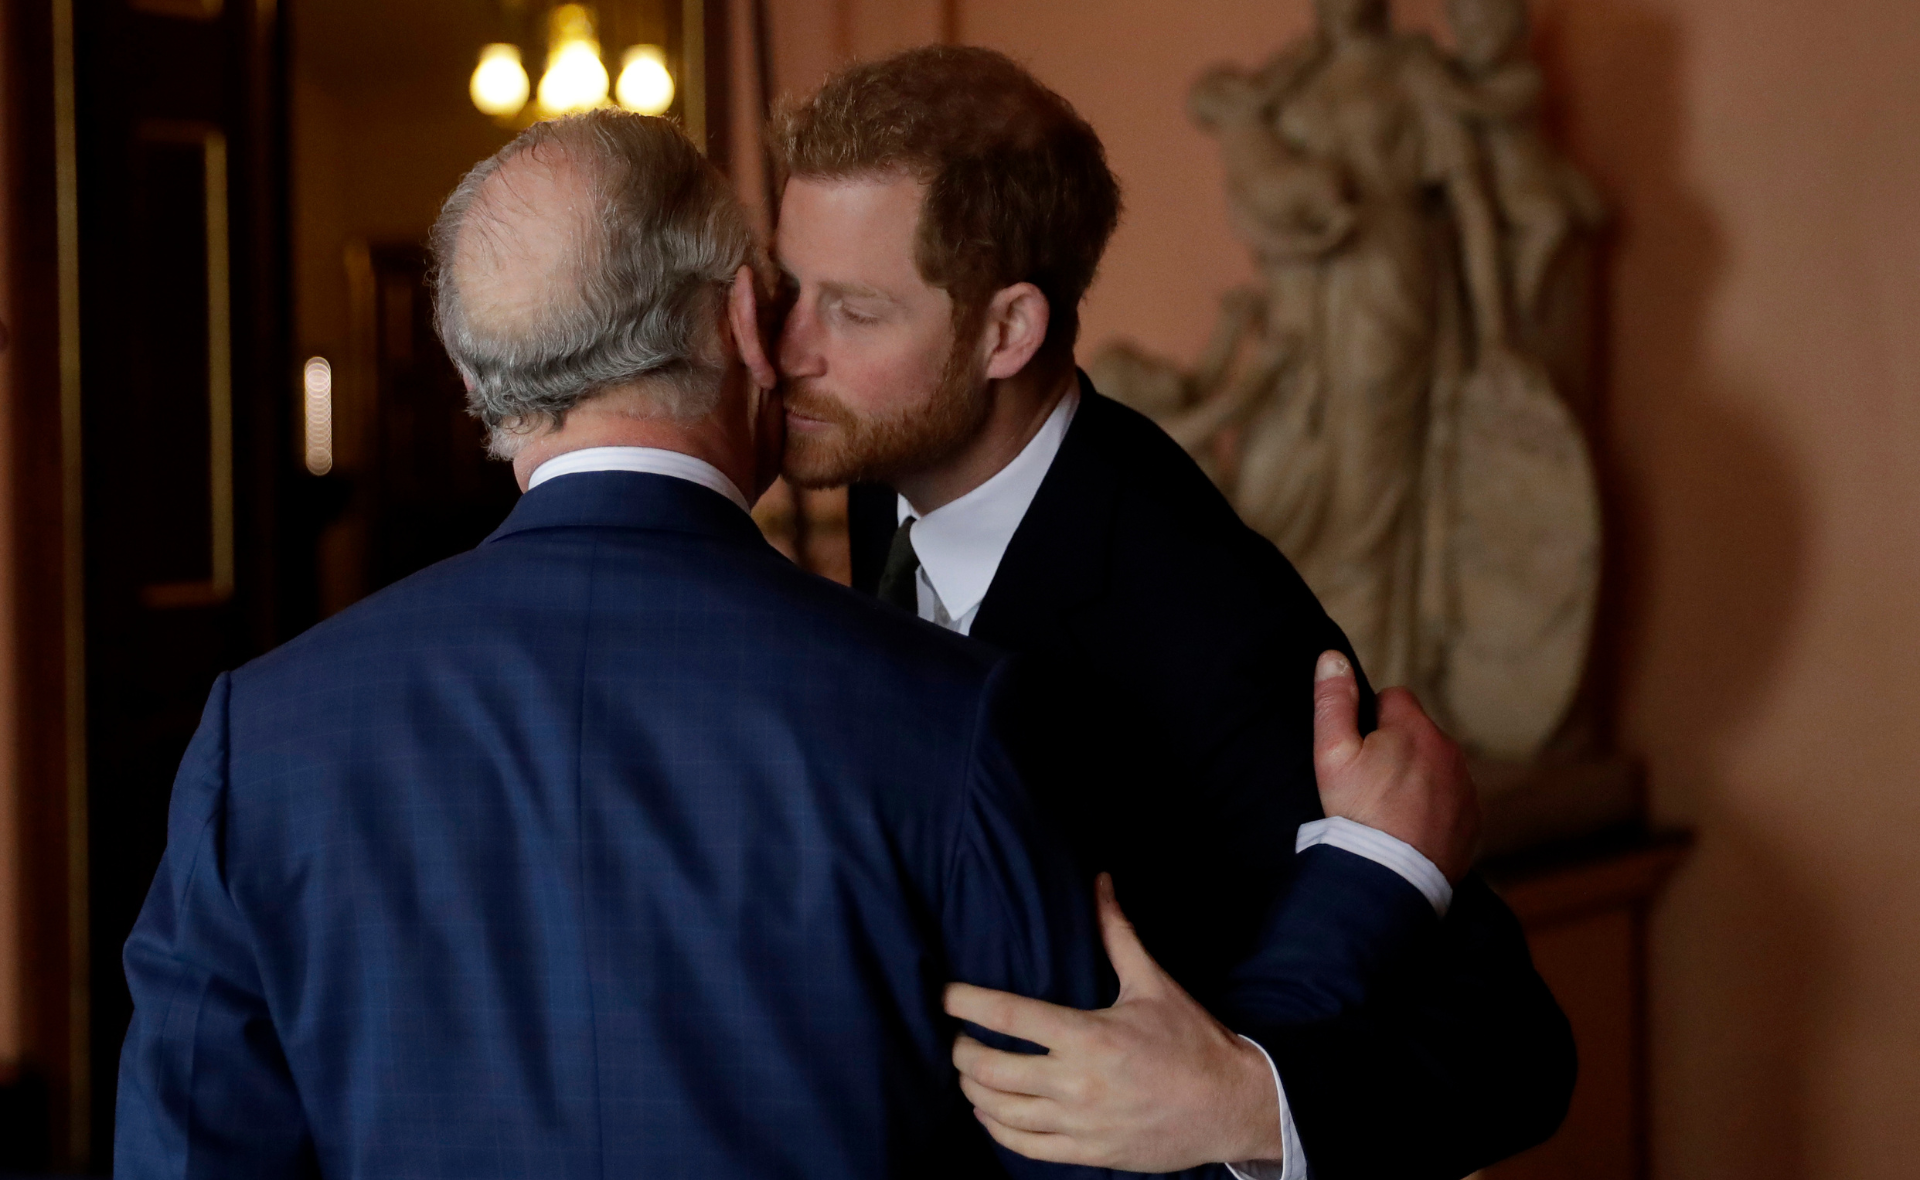 Prince Harry’s allegations involving his father King Charles and the royal family is taking its toll